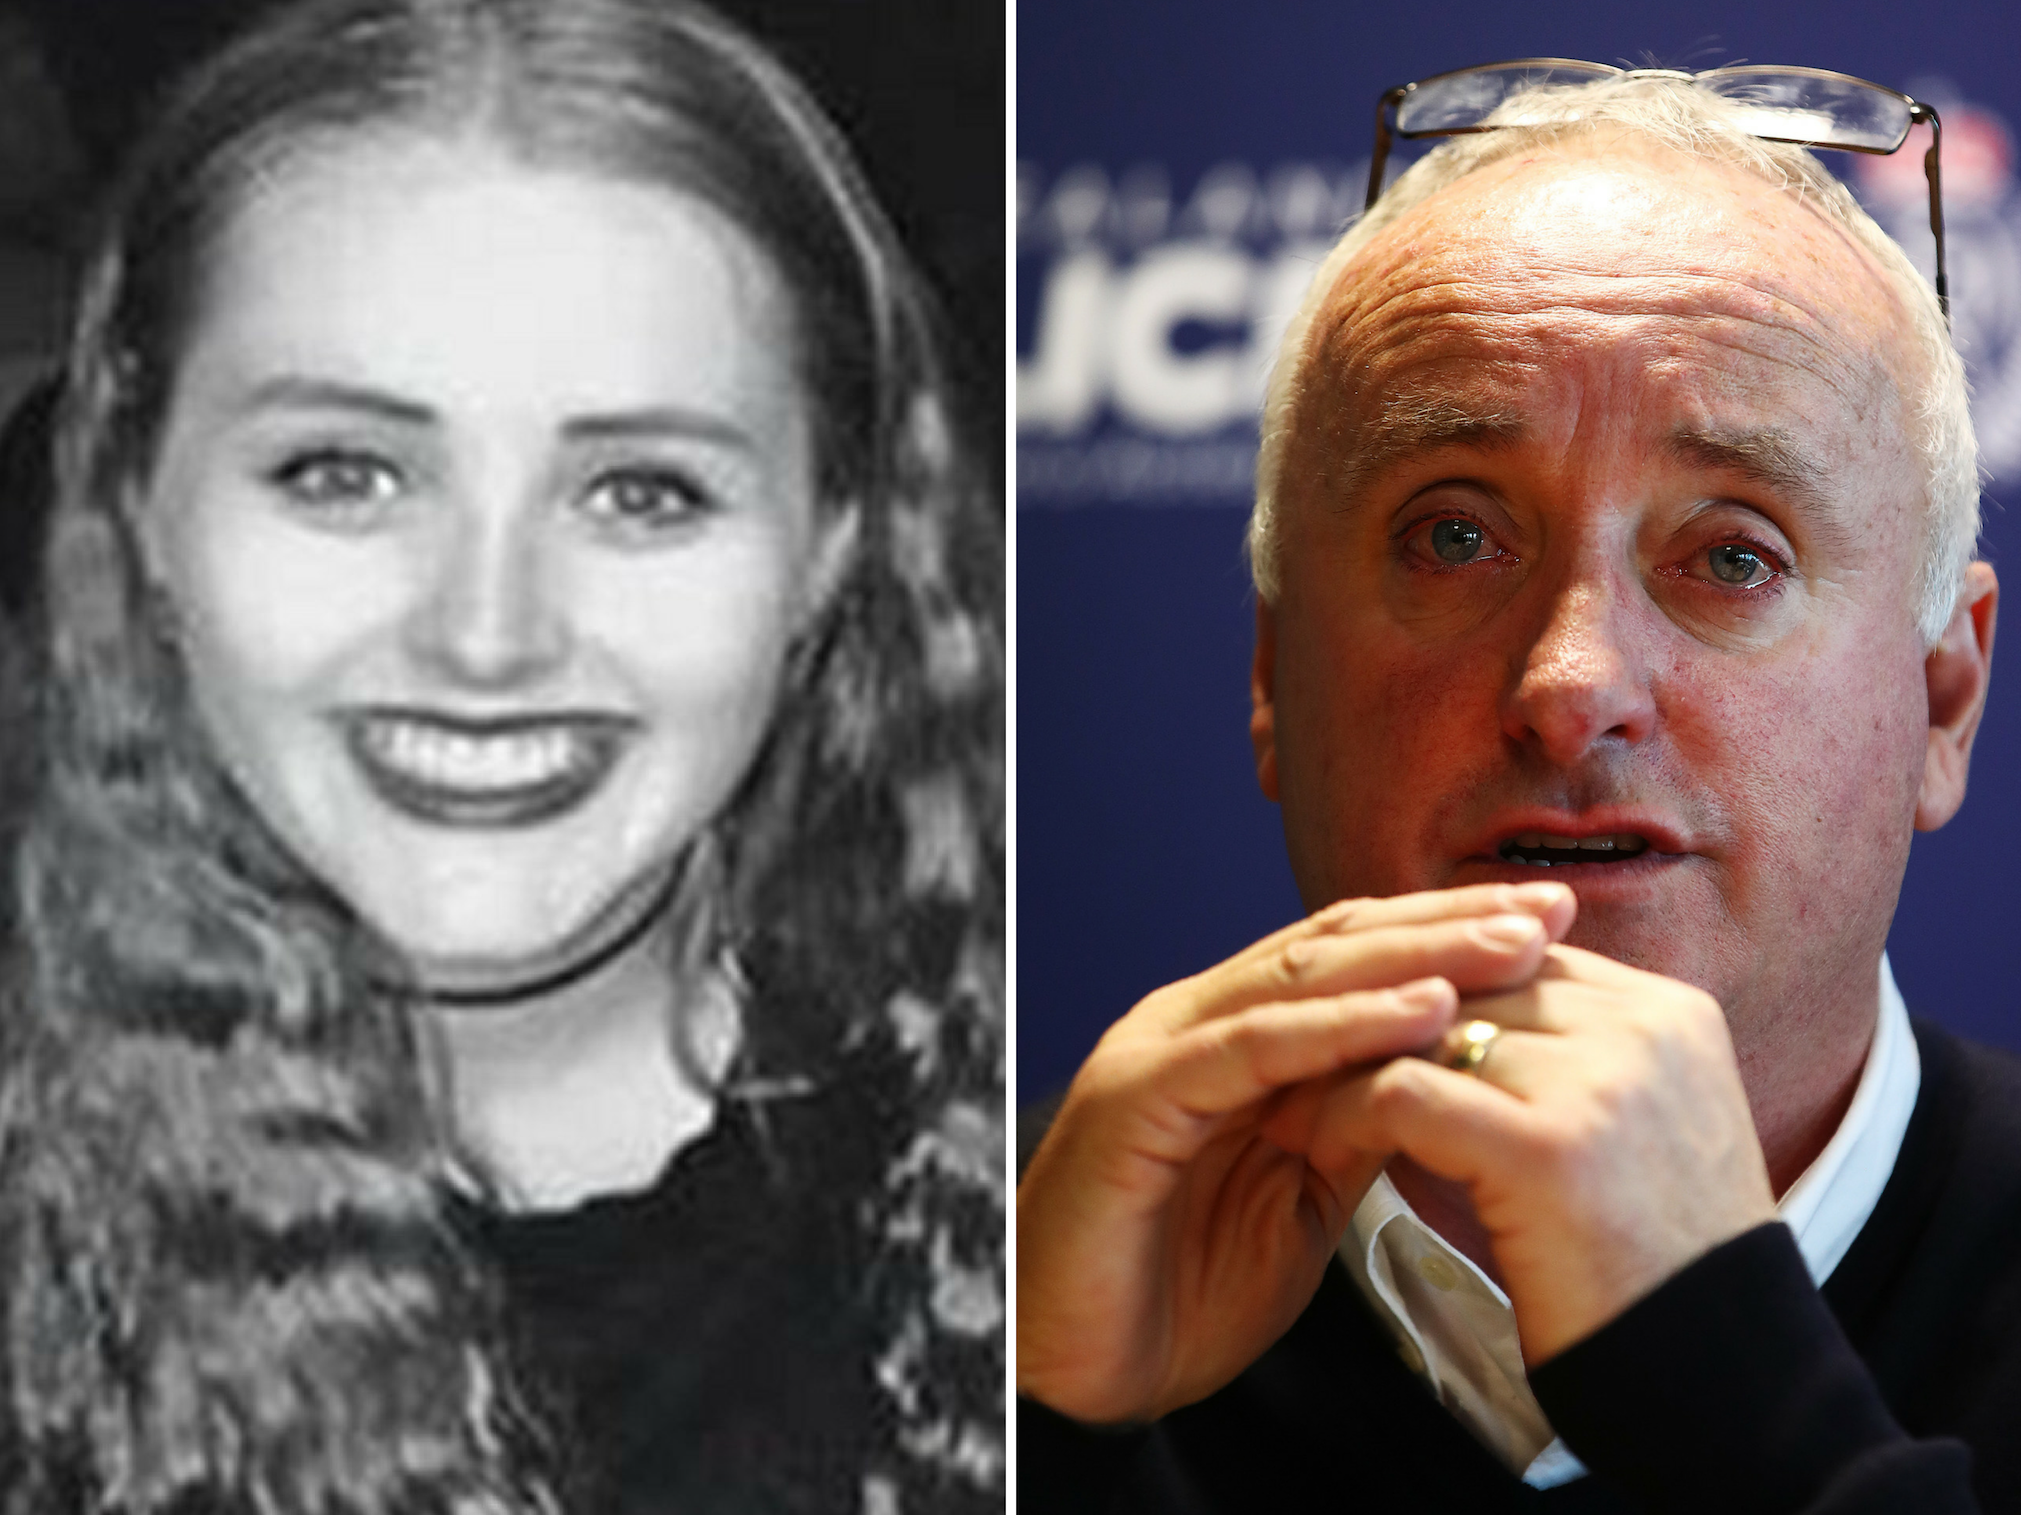 David Millane (right) makes an emotional appeal for help finding his missing daughter, 22-year-old British backpacker Grace Millane (left), who was last seen in Auckland, New Zealand, on 1 December